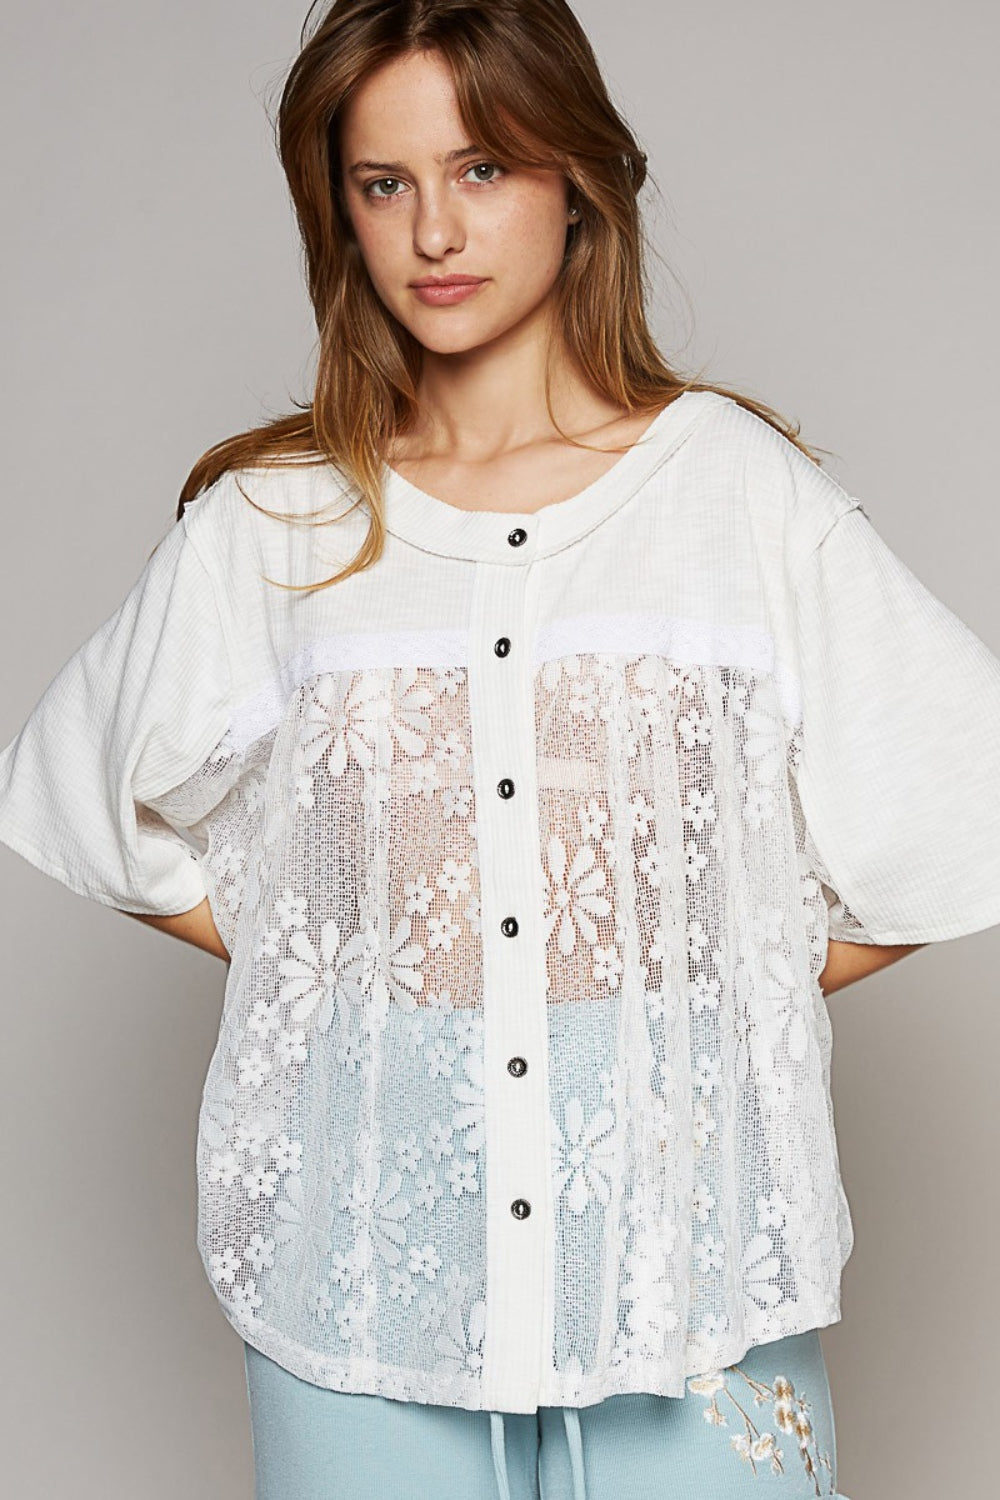 Alondra - Round Neck Short Sleeve Lace Top - Off White - Exclusively Online